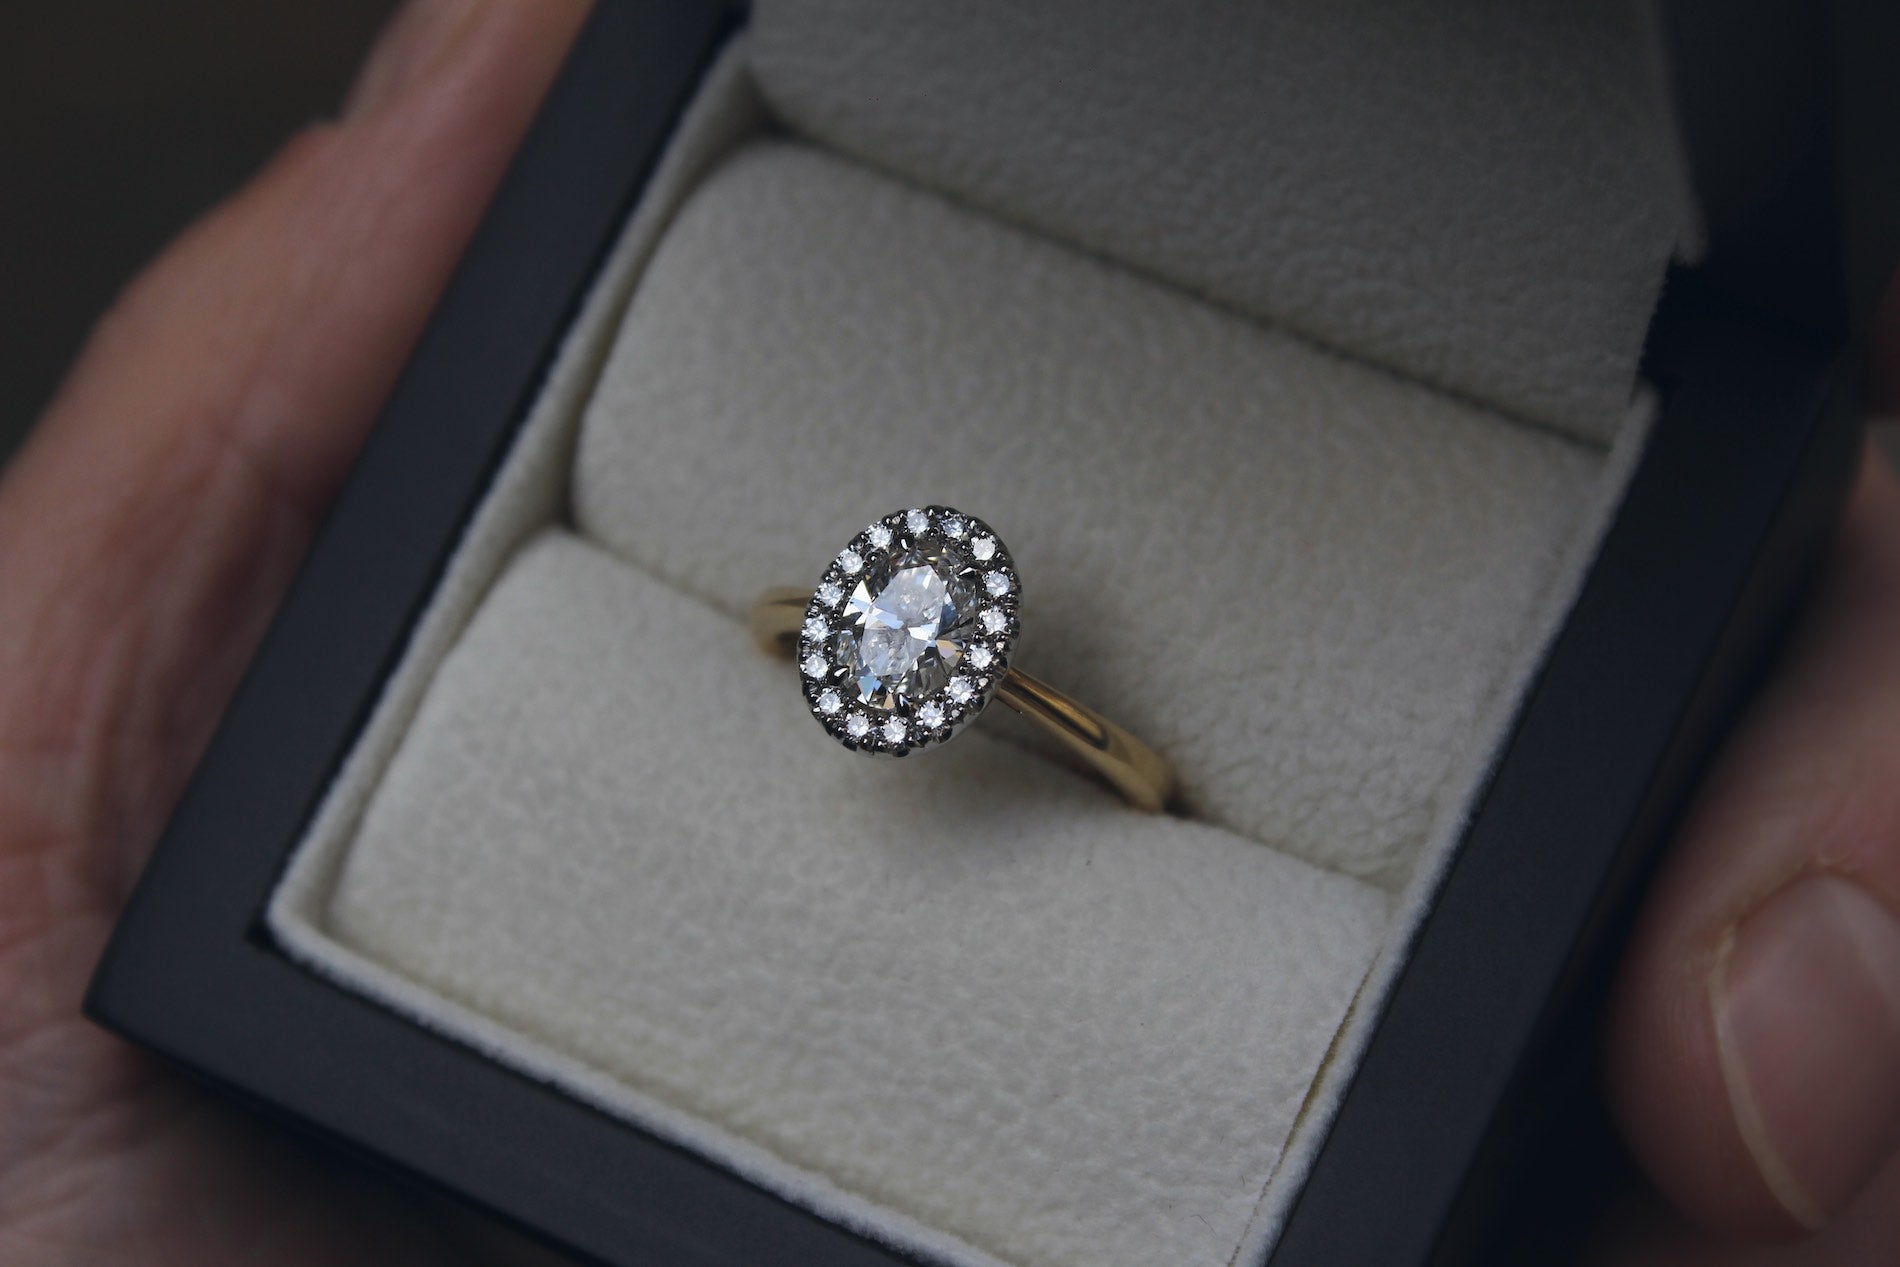 Oval Canadian Diamond Engagement Ring